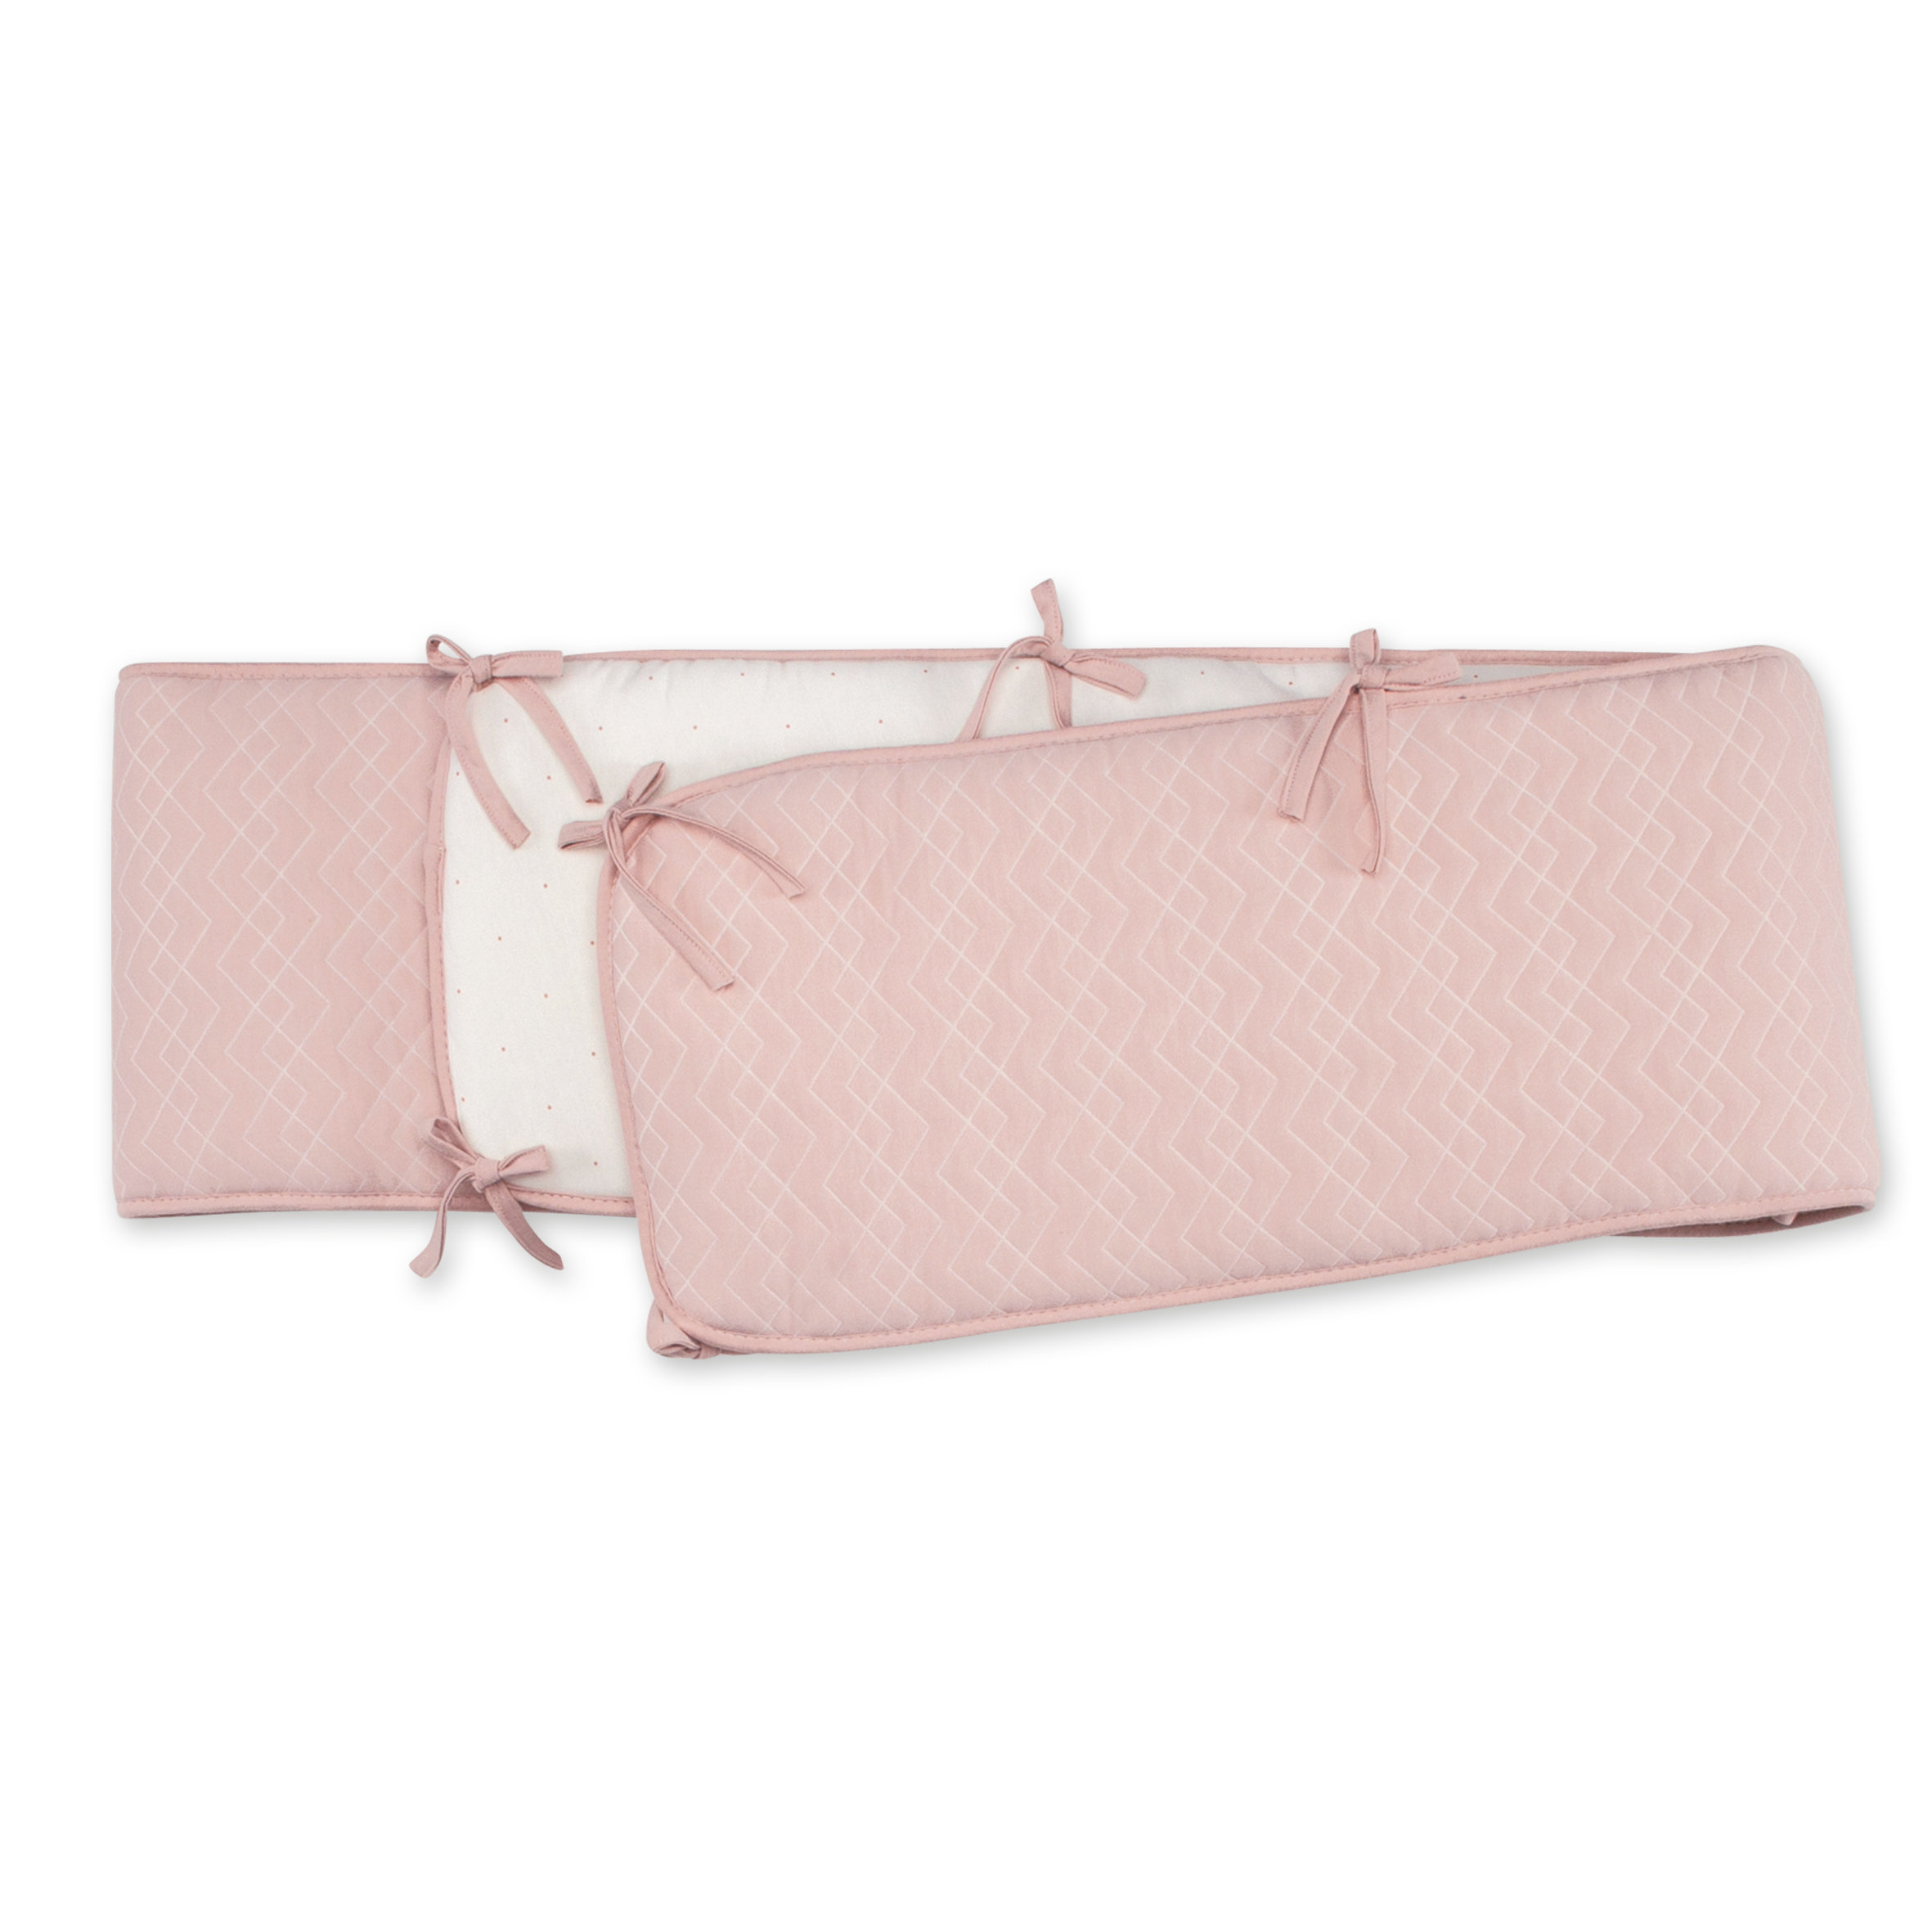 Protector de parque Pady quilted jersey + jersey 100x100x28cm OSAKA Rosa vieja